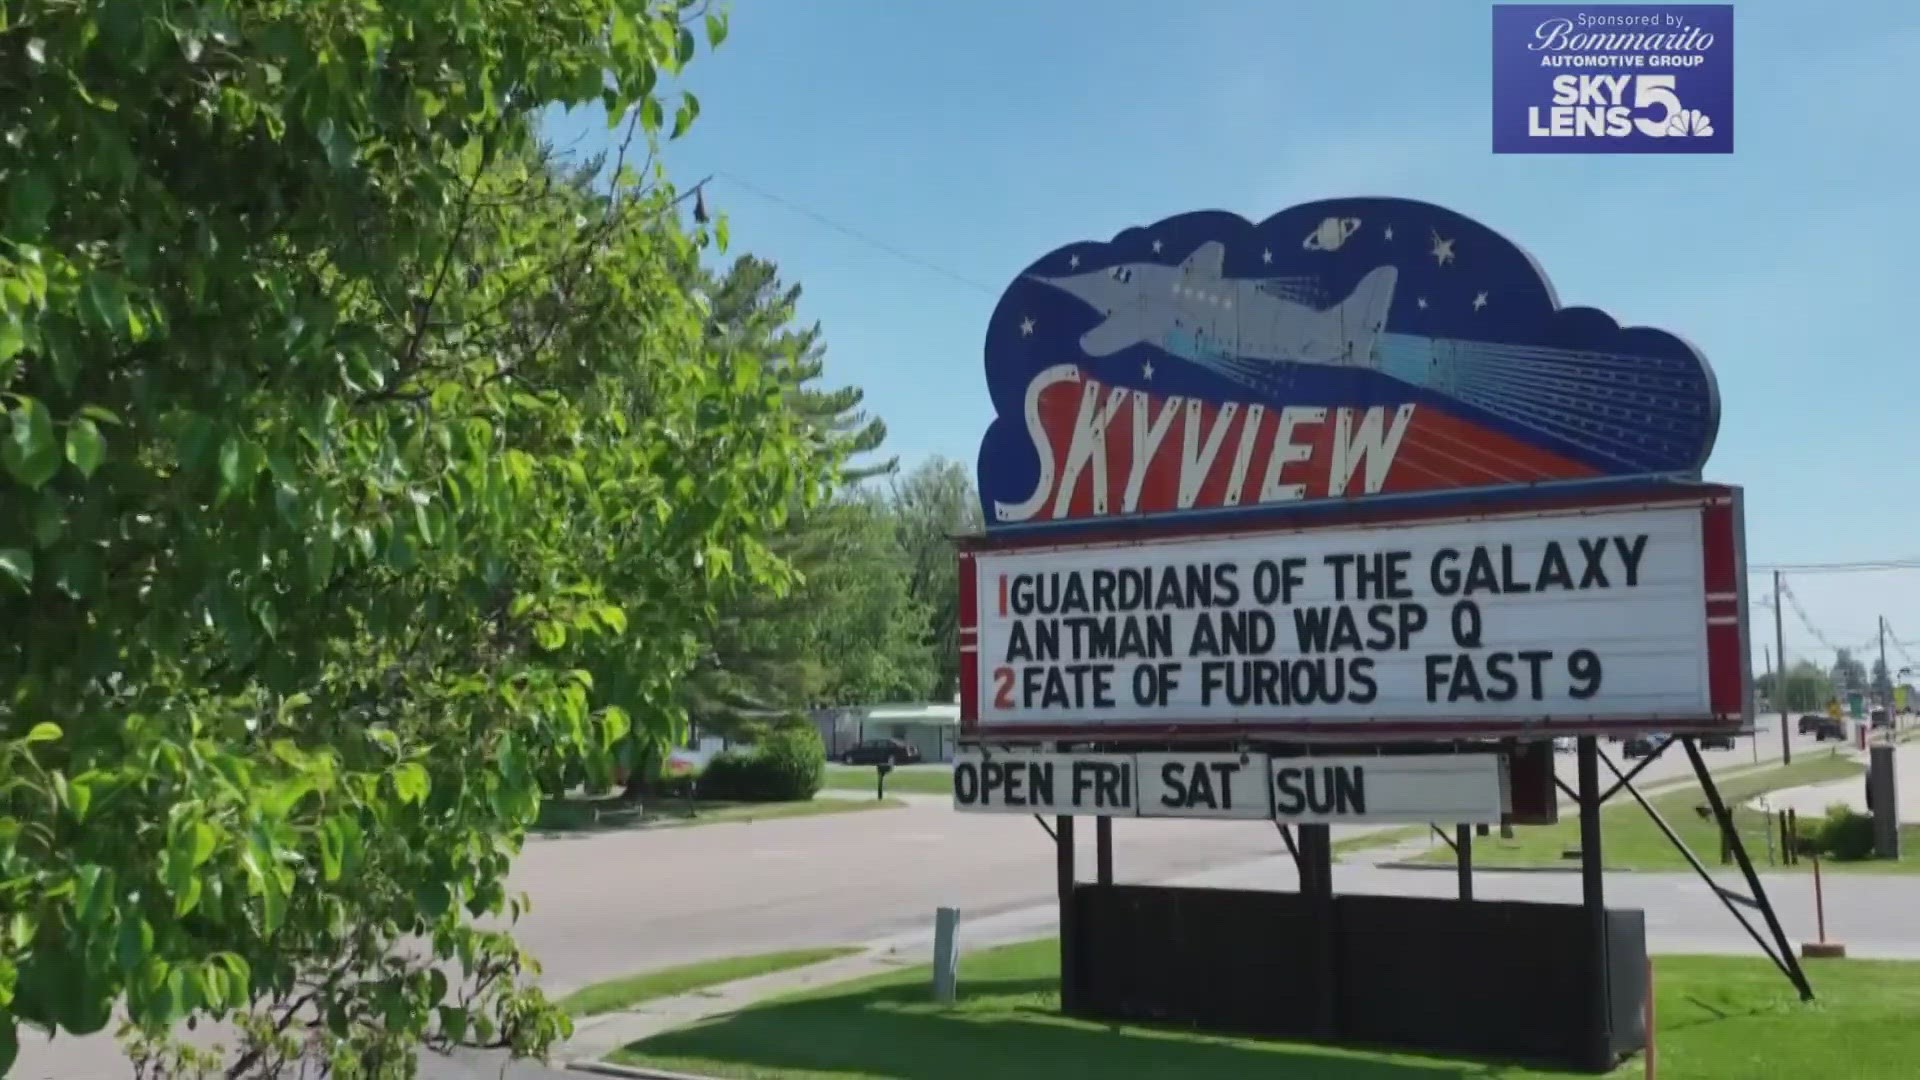 Skyview Drive-In has been open for nearly 75 years and it has seen it all. Opened and operated by one family since the beginning, Skyview is a local favorite.